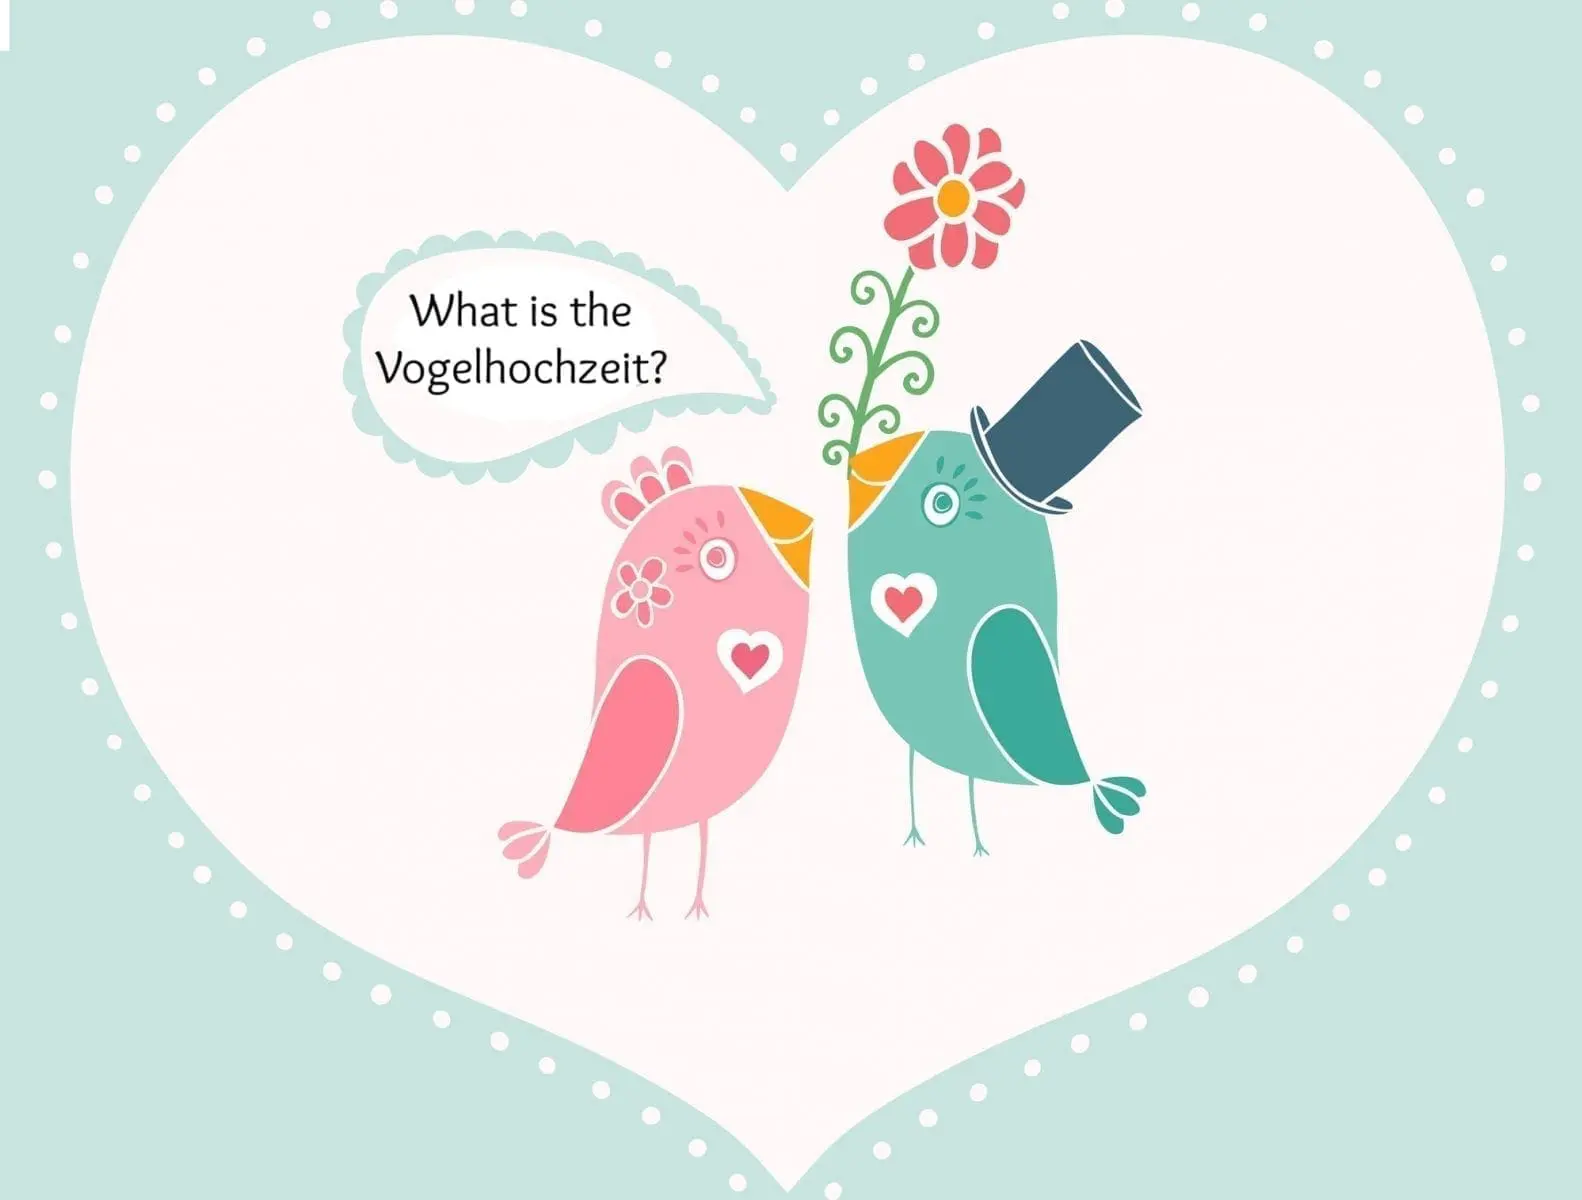 What is the Vogelhochzeit? It’s a song to Welcome Spring!